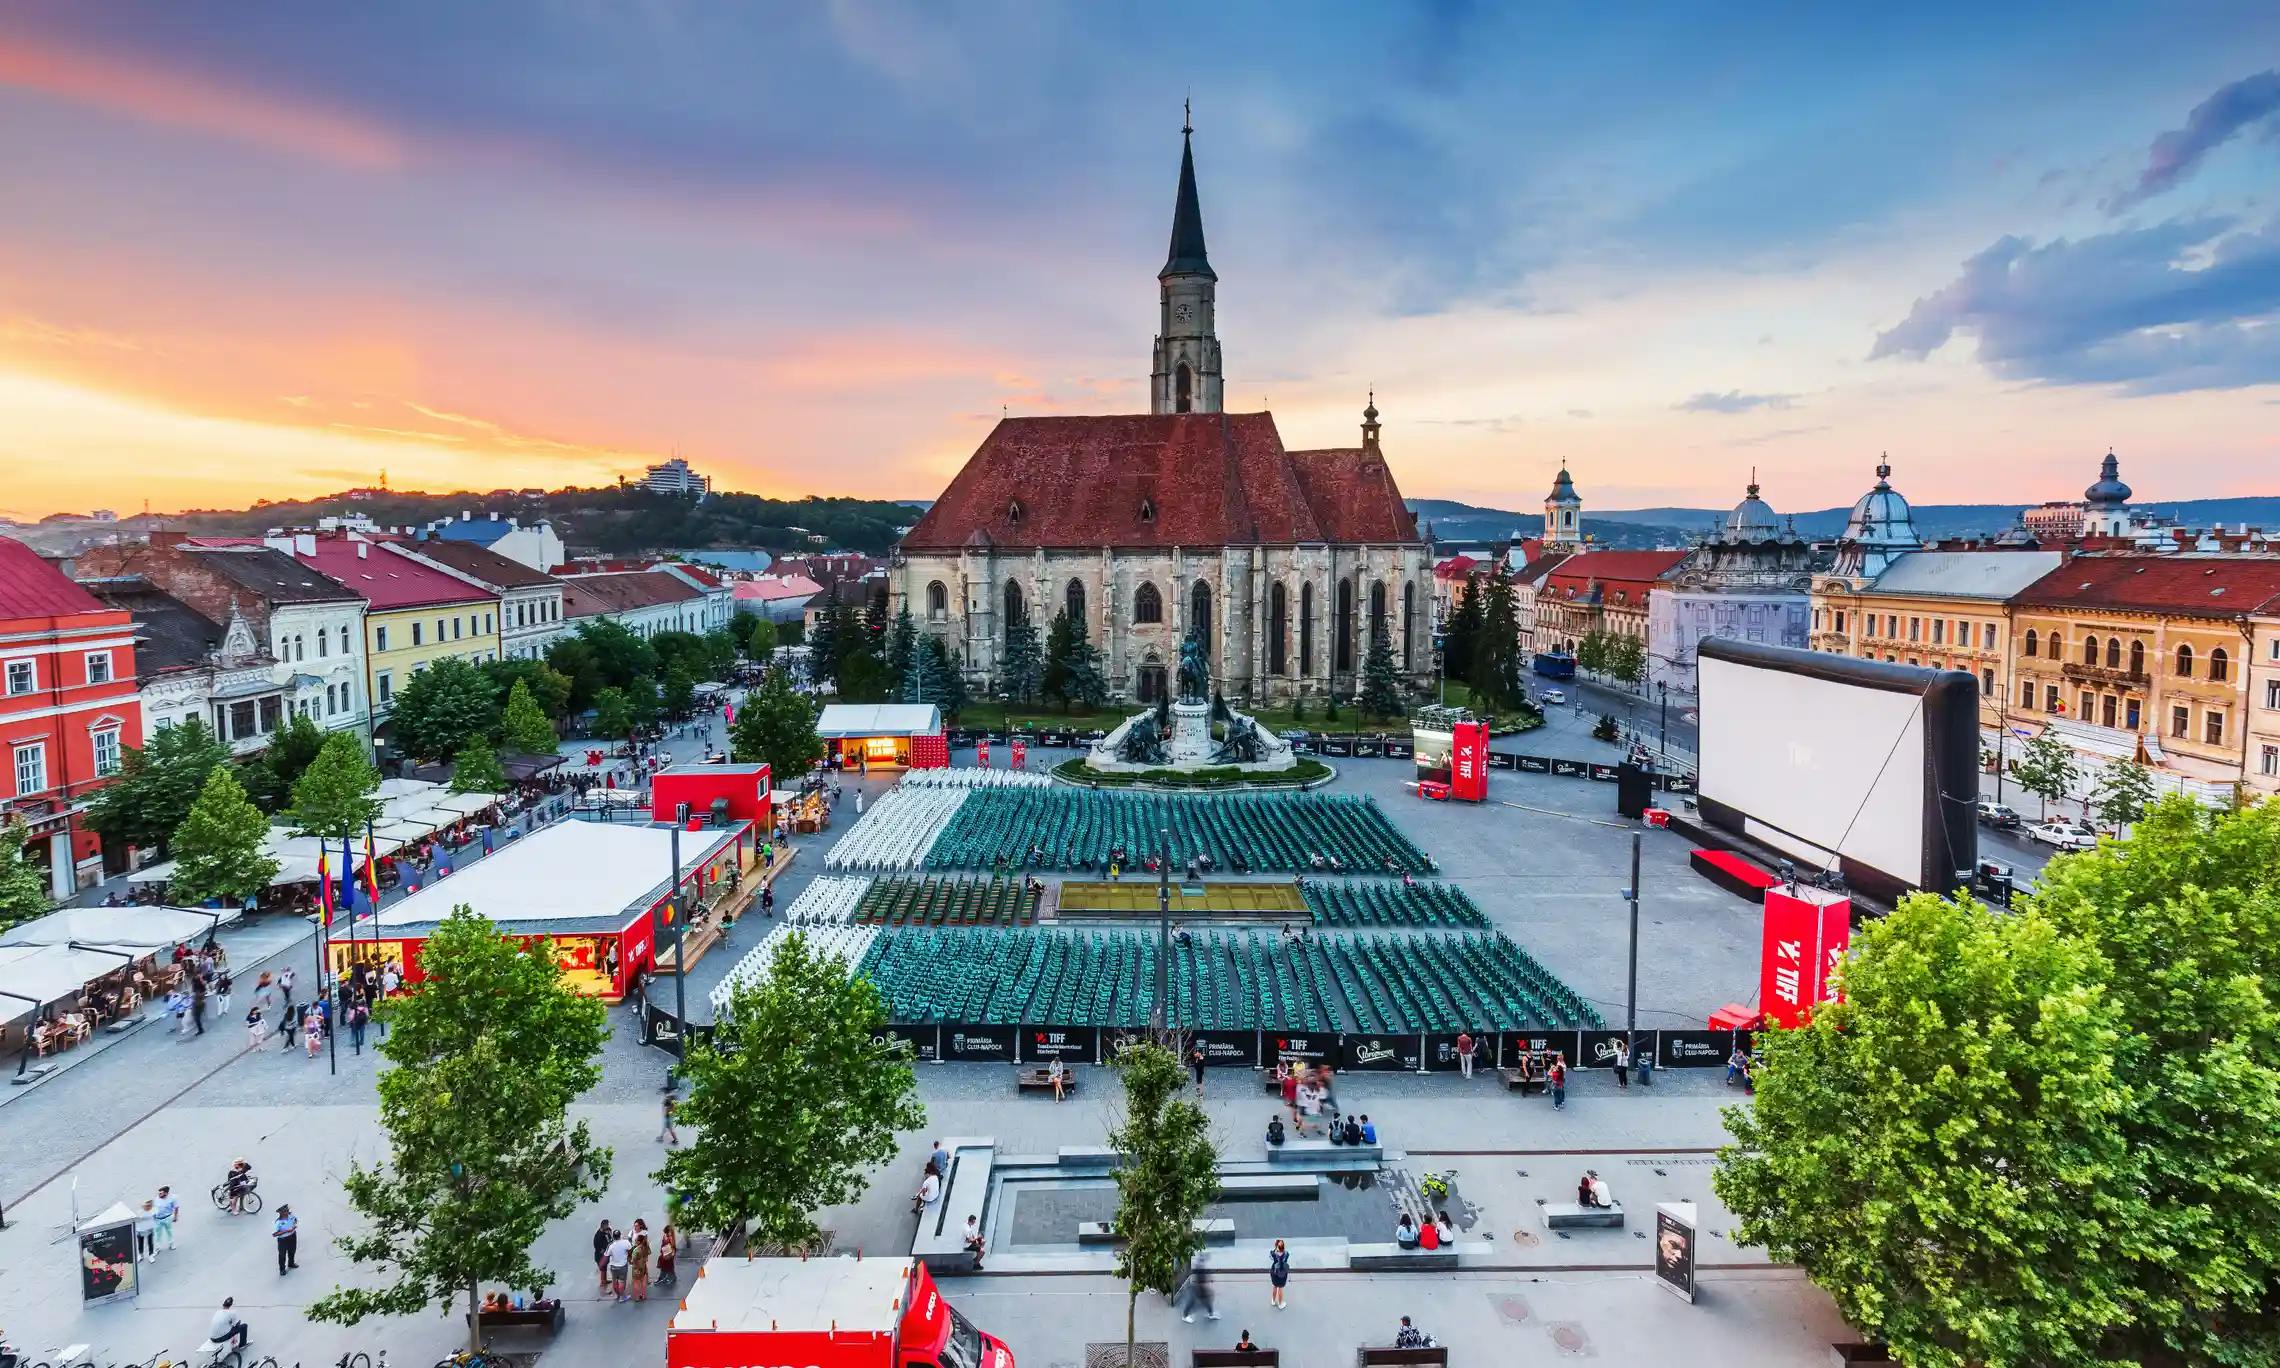 aerial view of Unirii Square in the center of the old city center of Cluj